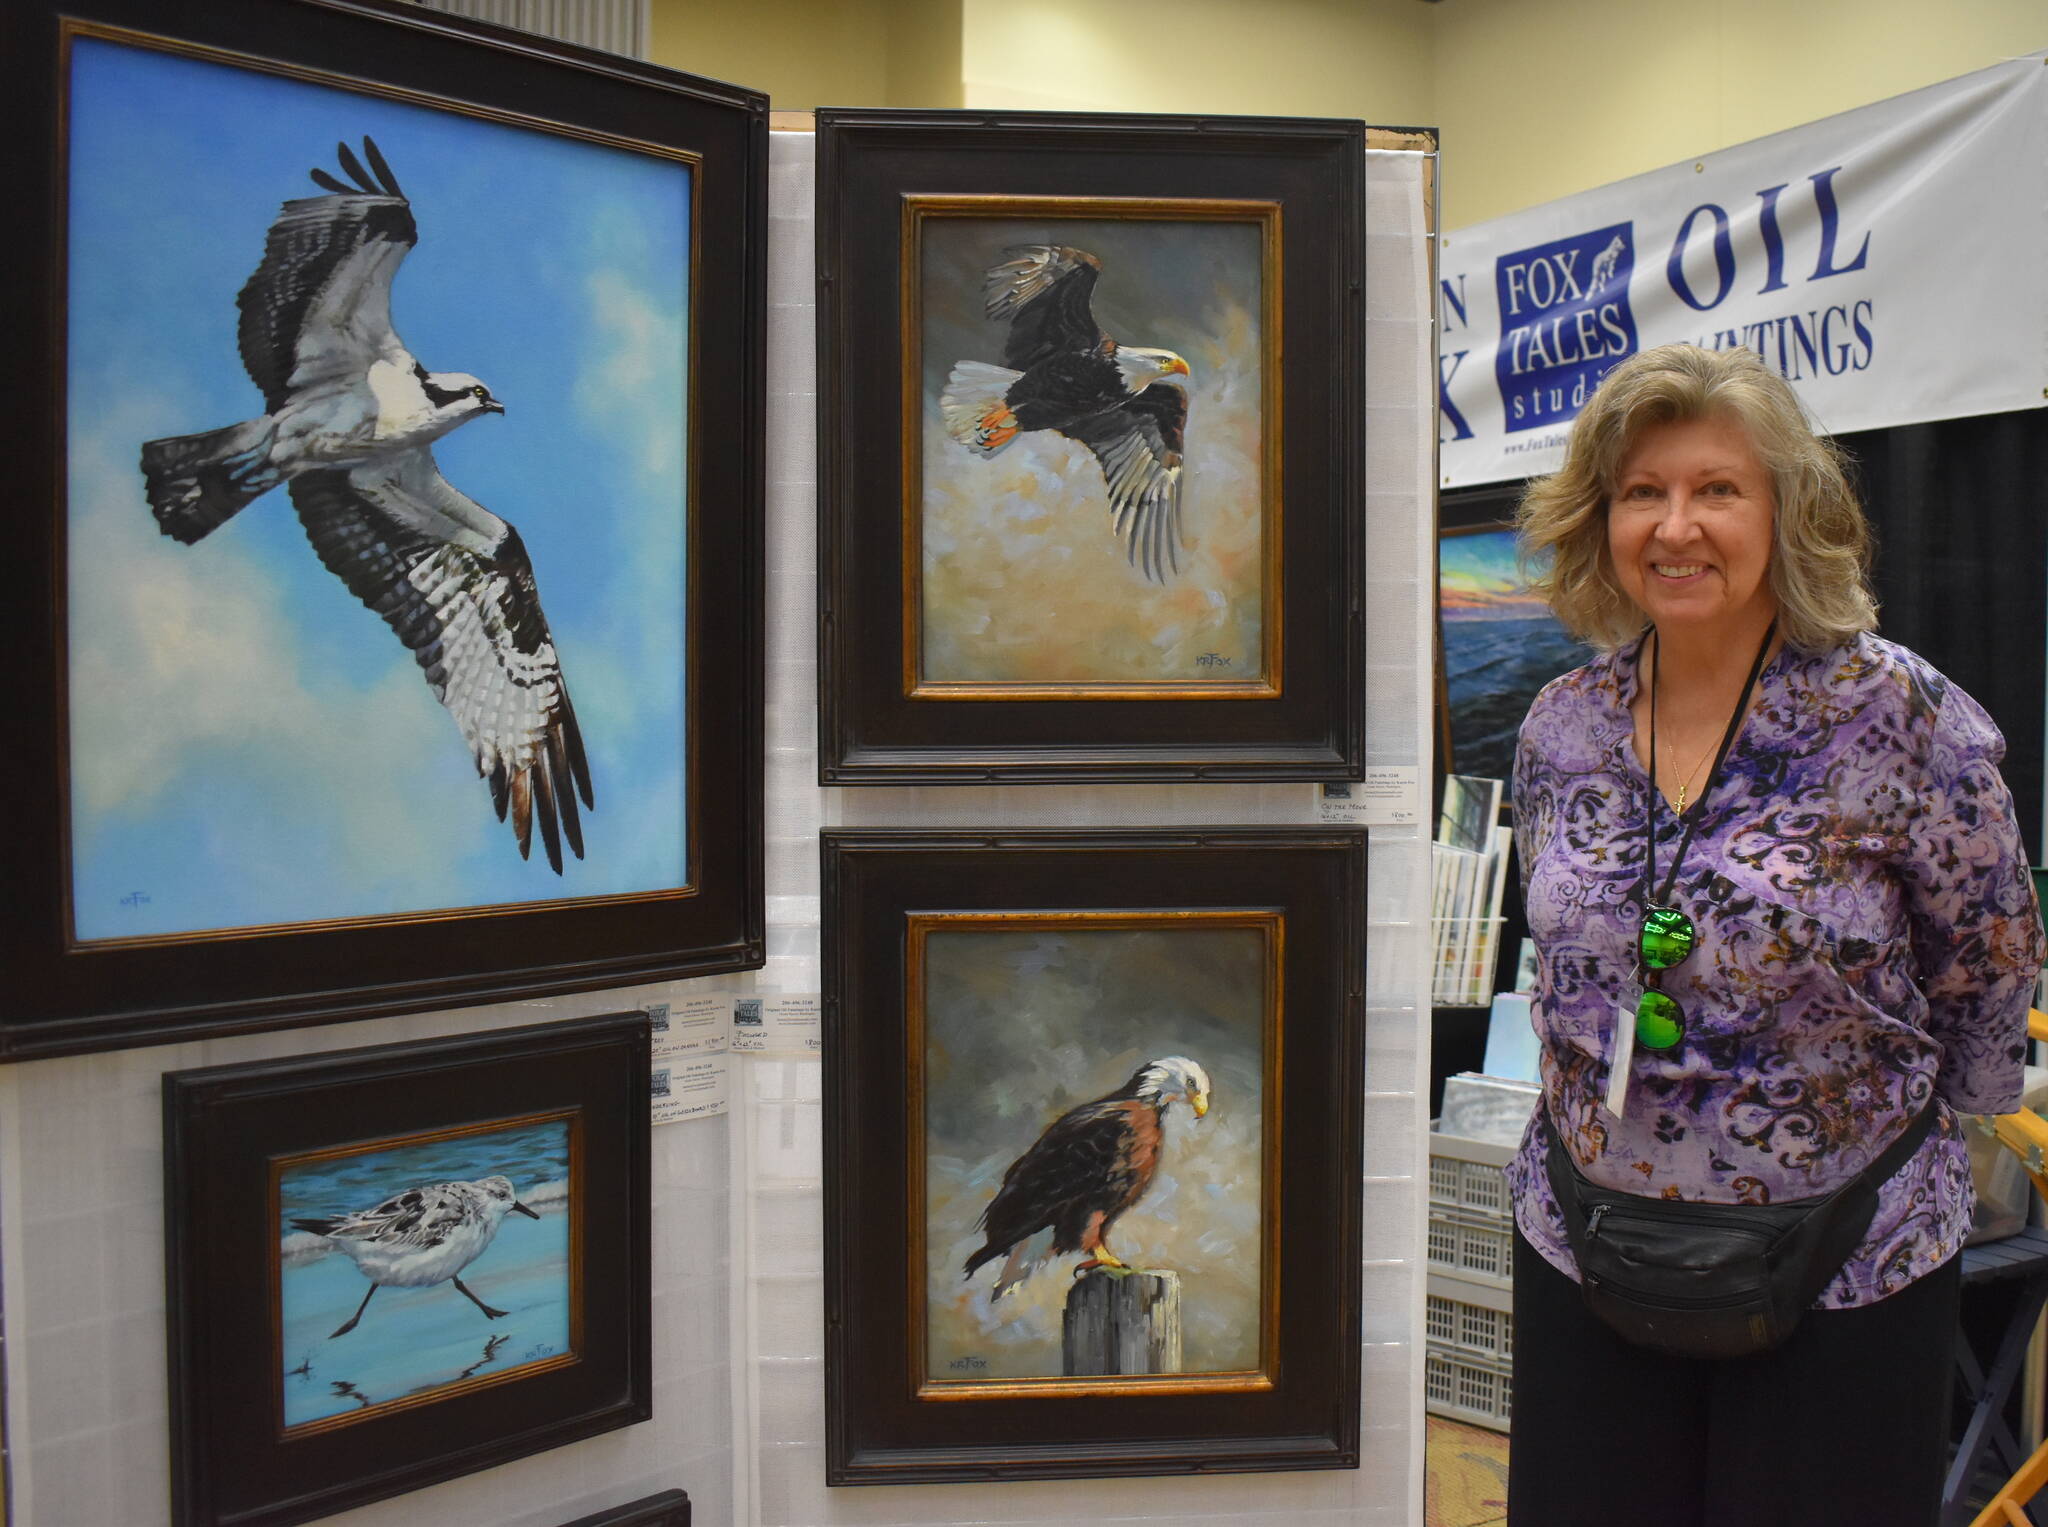 Matthew N. Wells / The Daily World
Karen Fox, who paints animals and vivid nature scenes, stands proudly by a few of her work this past weekend at the 54th annual Associated Arts Ocean Shores Arts & Crafts Festival. Fox has been painting since 1997, but much of her work accelerated during the COVID-19 pandemic. More of her work can be found by searching online for Fox Tales Studio.